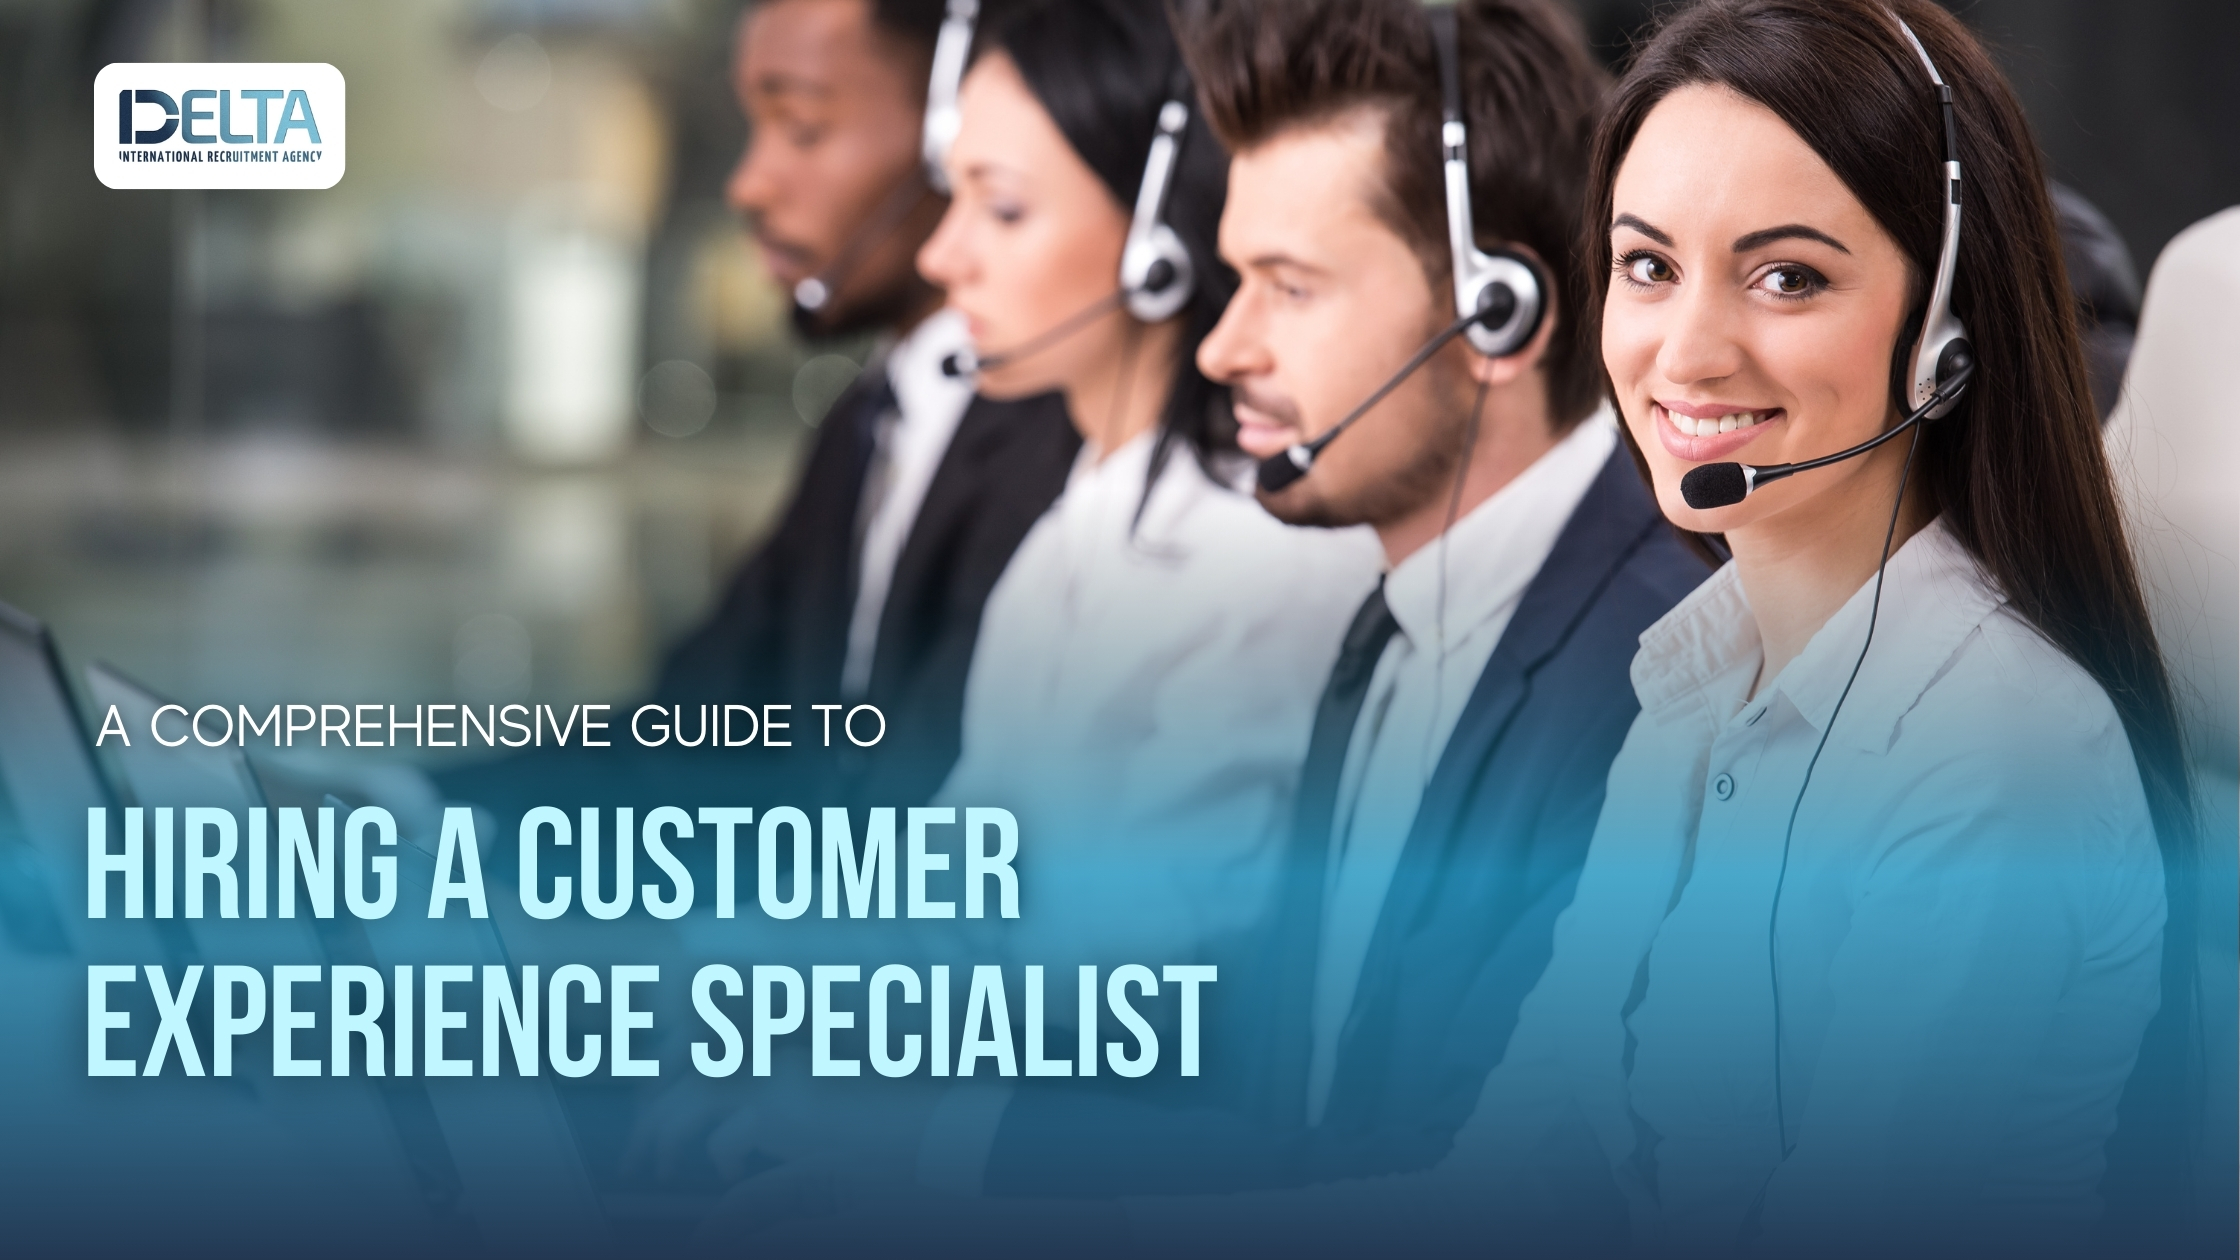 A Comprehensive Guide to Hiring a Customer Experience Specialist